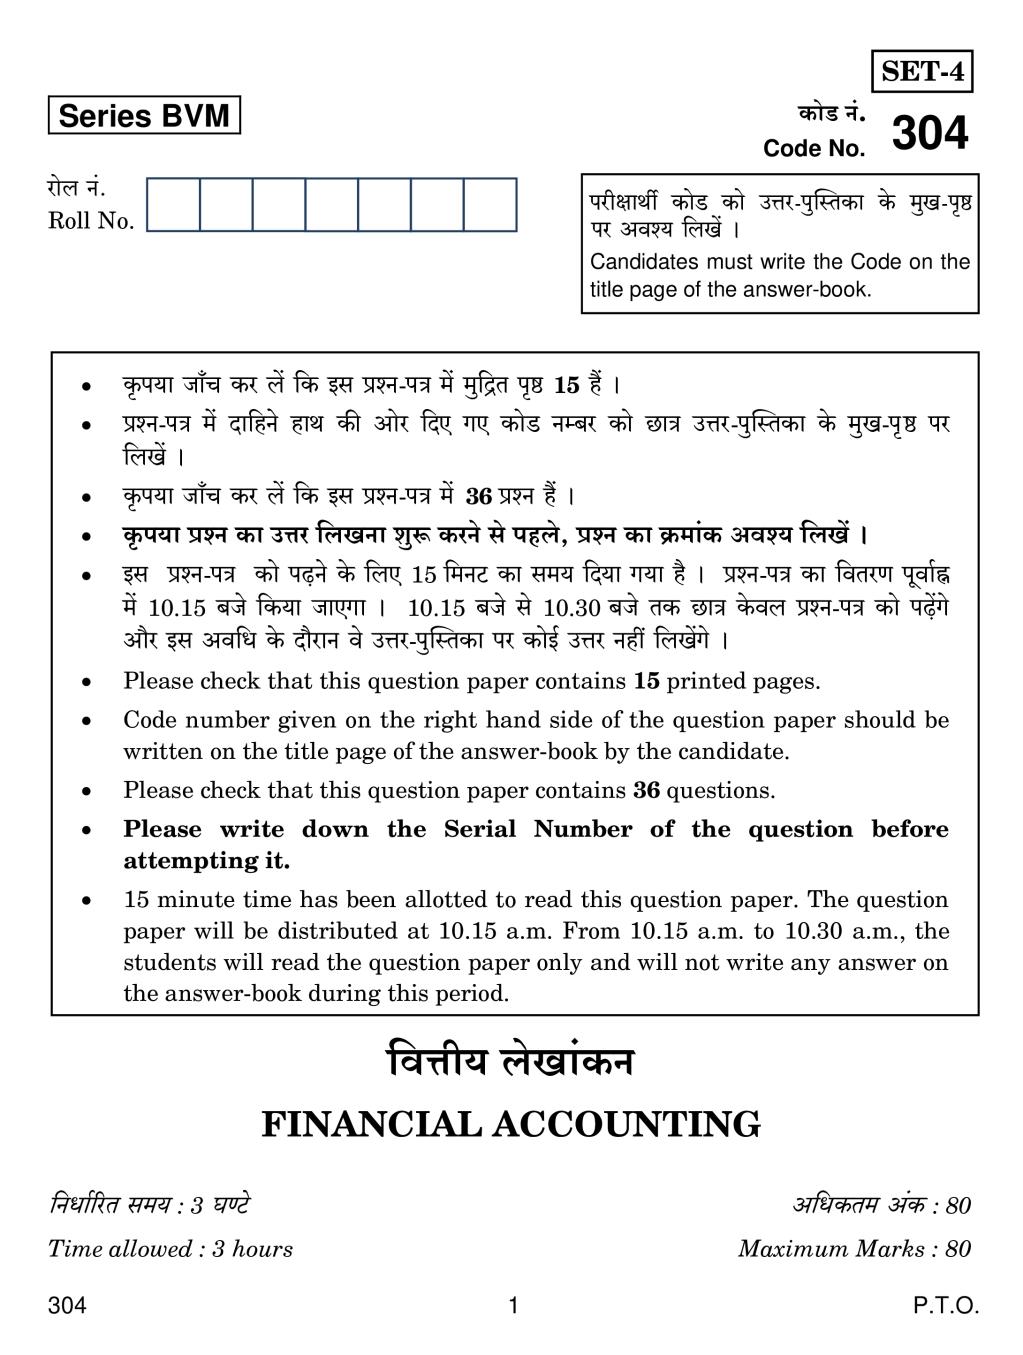 CBSE Class 12 Financial Accounting Question Paper 2019 - Page 1